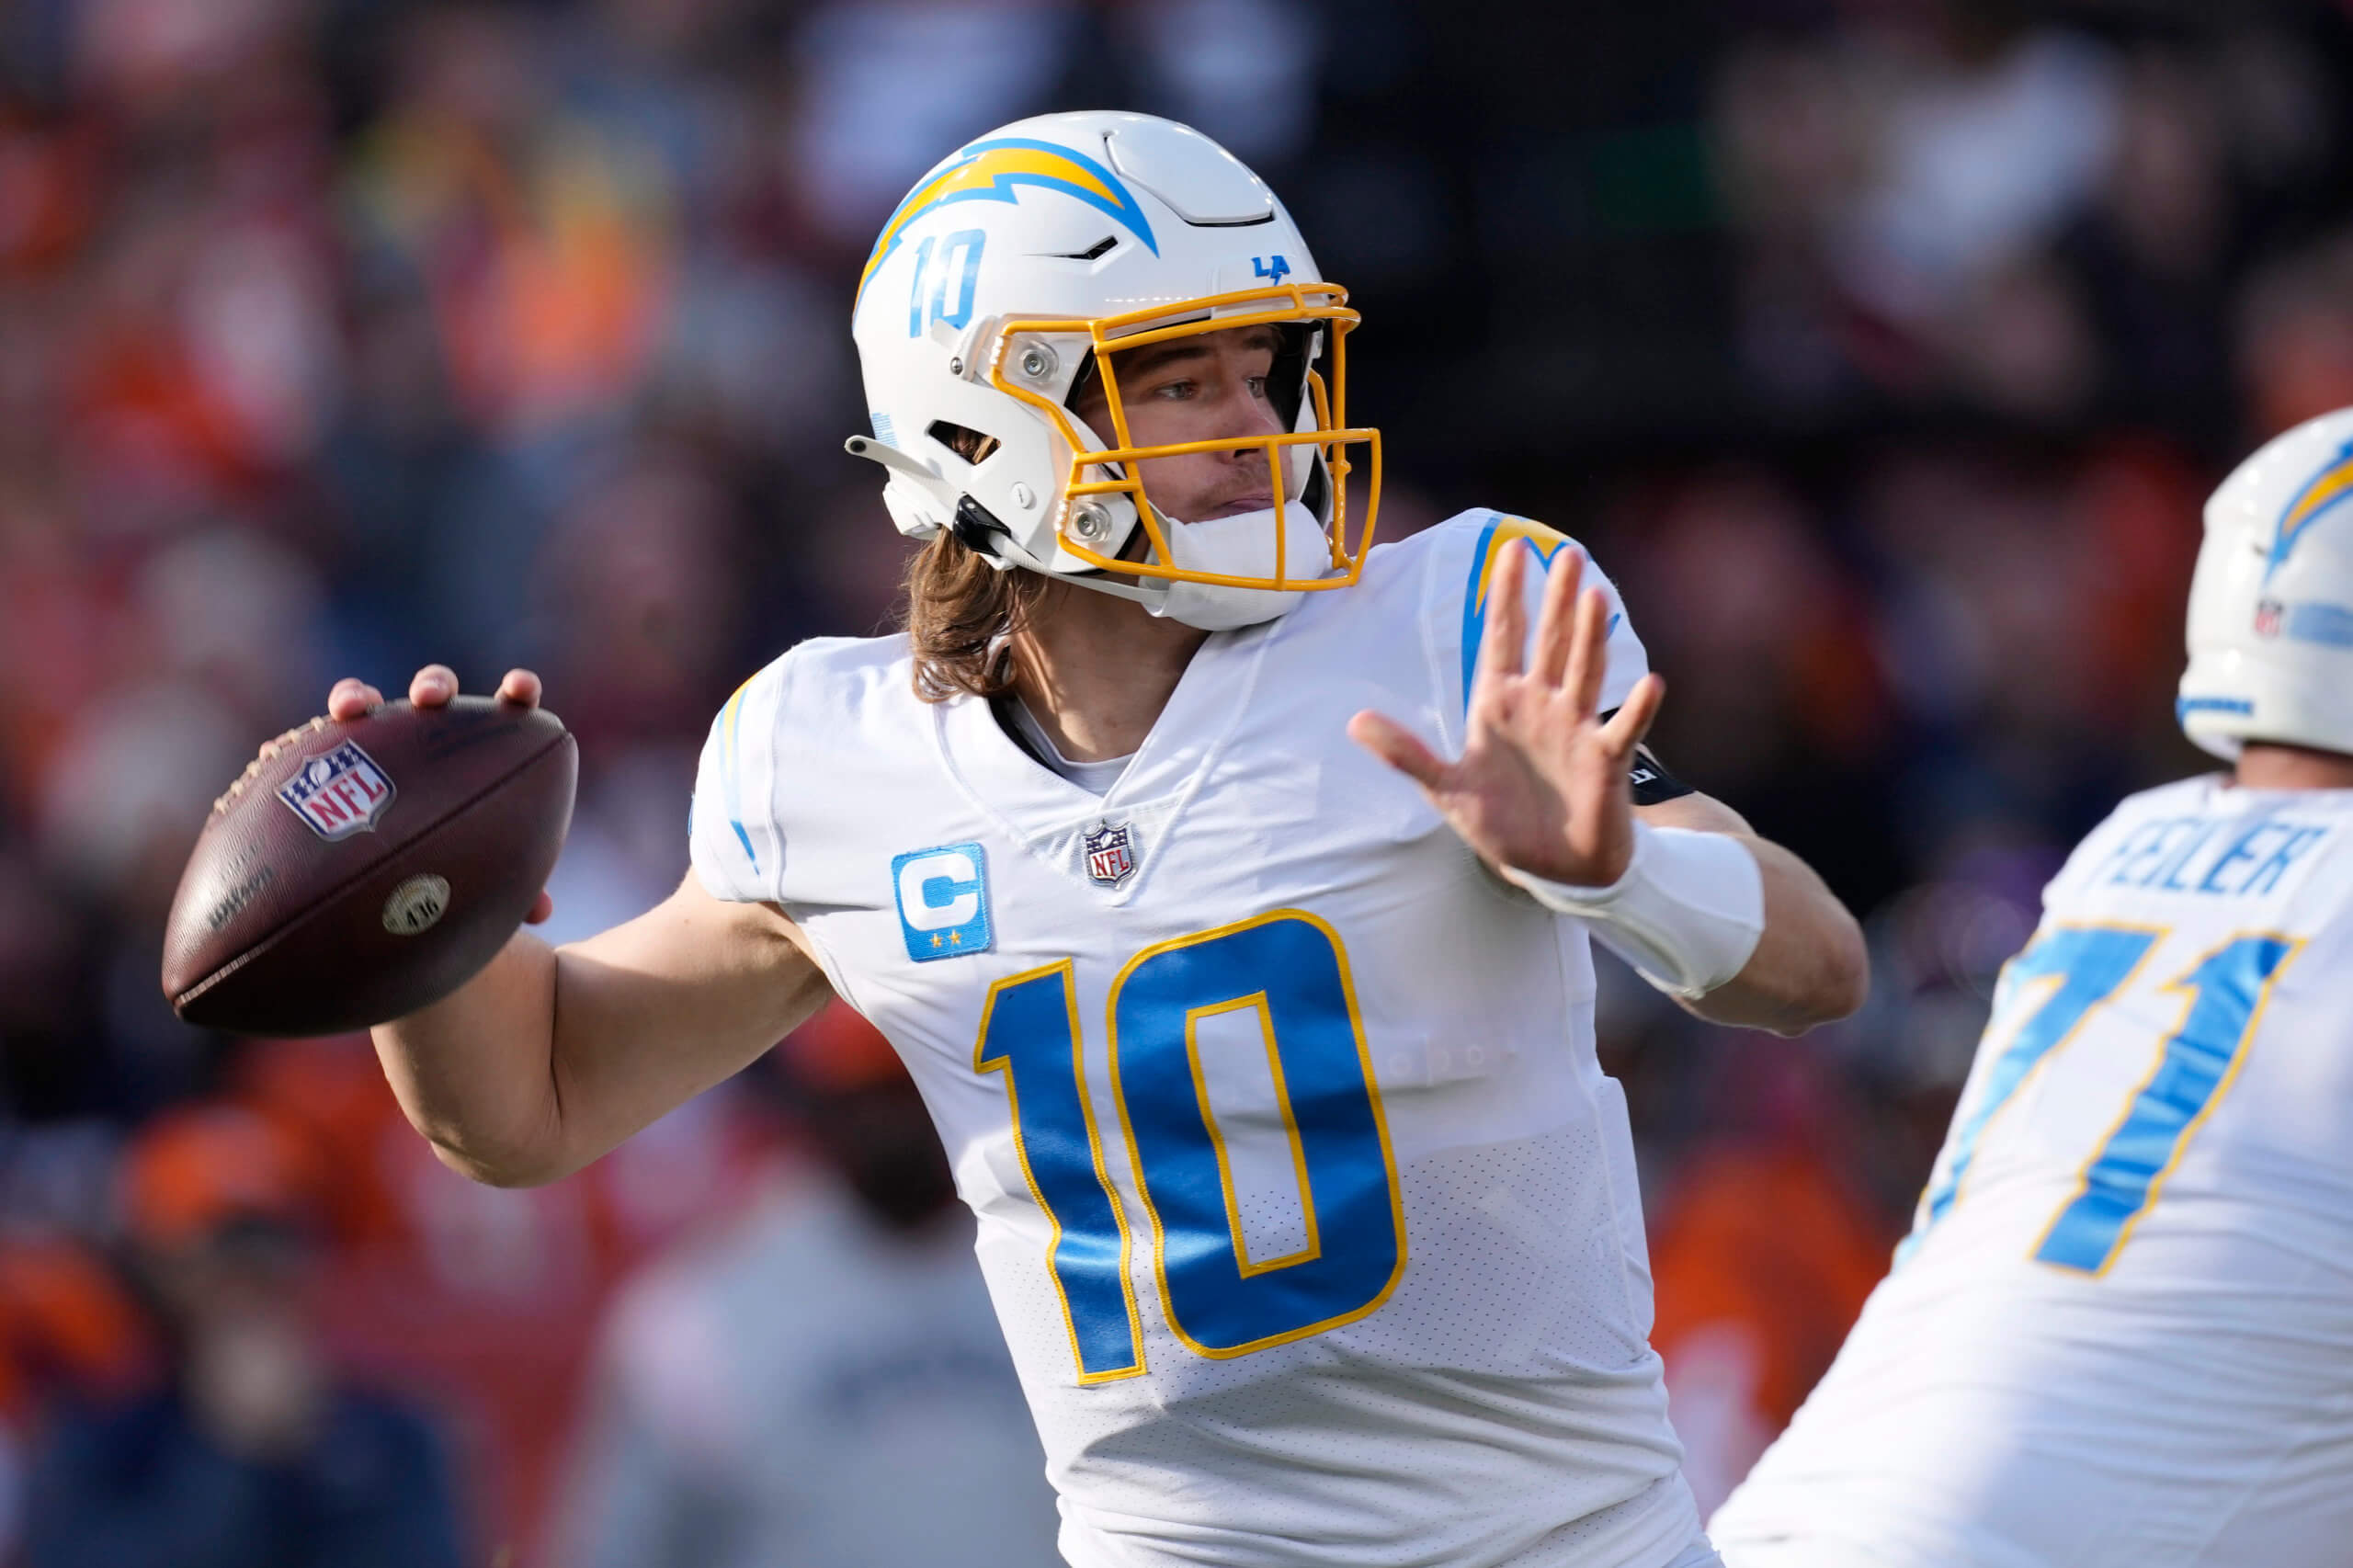 Los Angeles Chargers vs Jacksonville Jaguars: Preview, odds, more